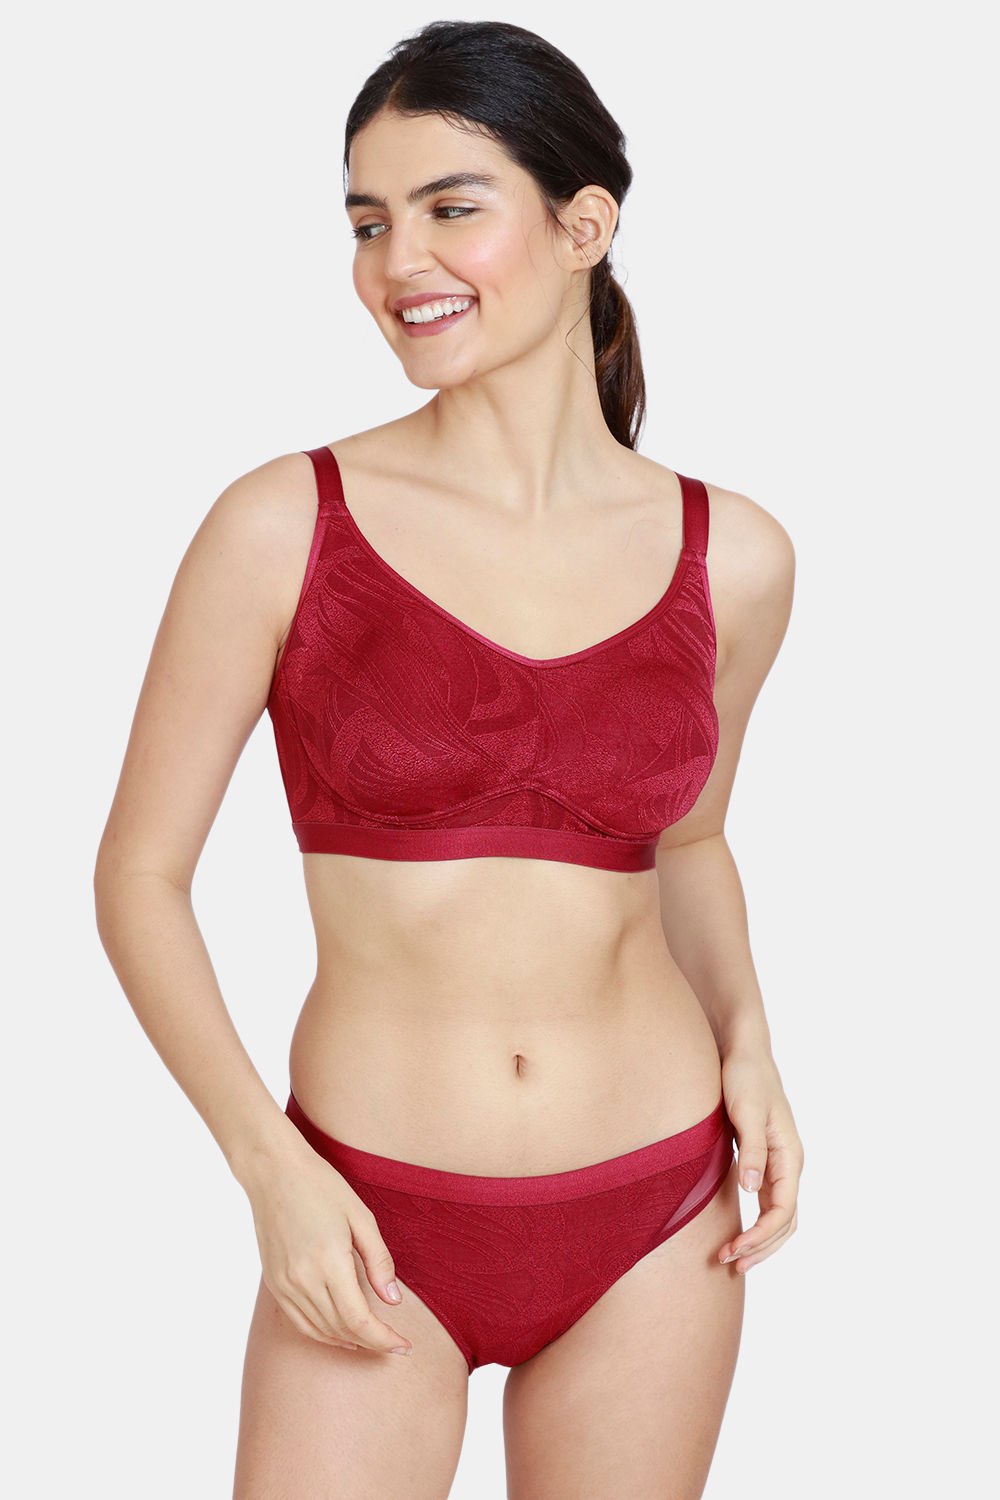 Zivame Jacquard Scrolls Single Layered Non-Wired Full Coverage Super  Support Bra - Rhododendron